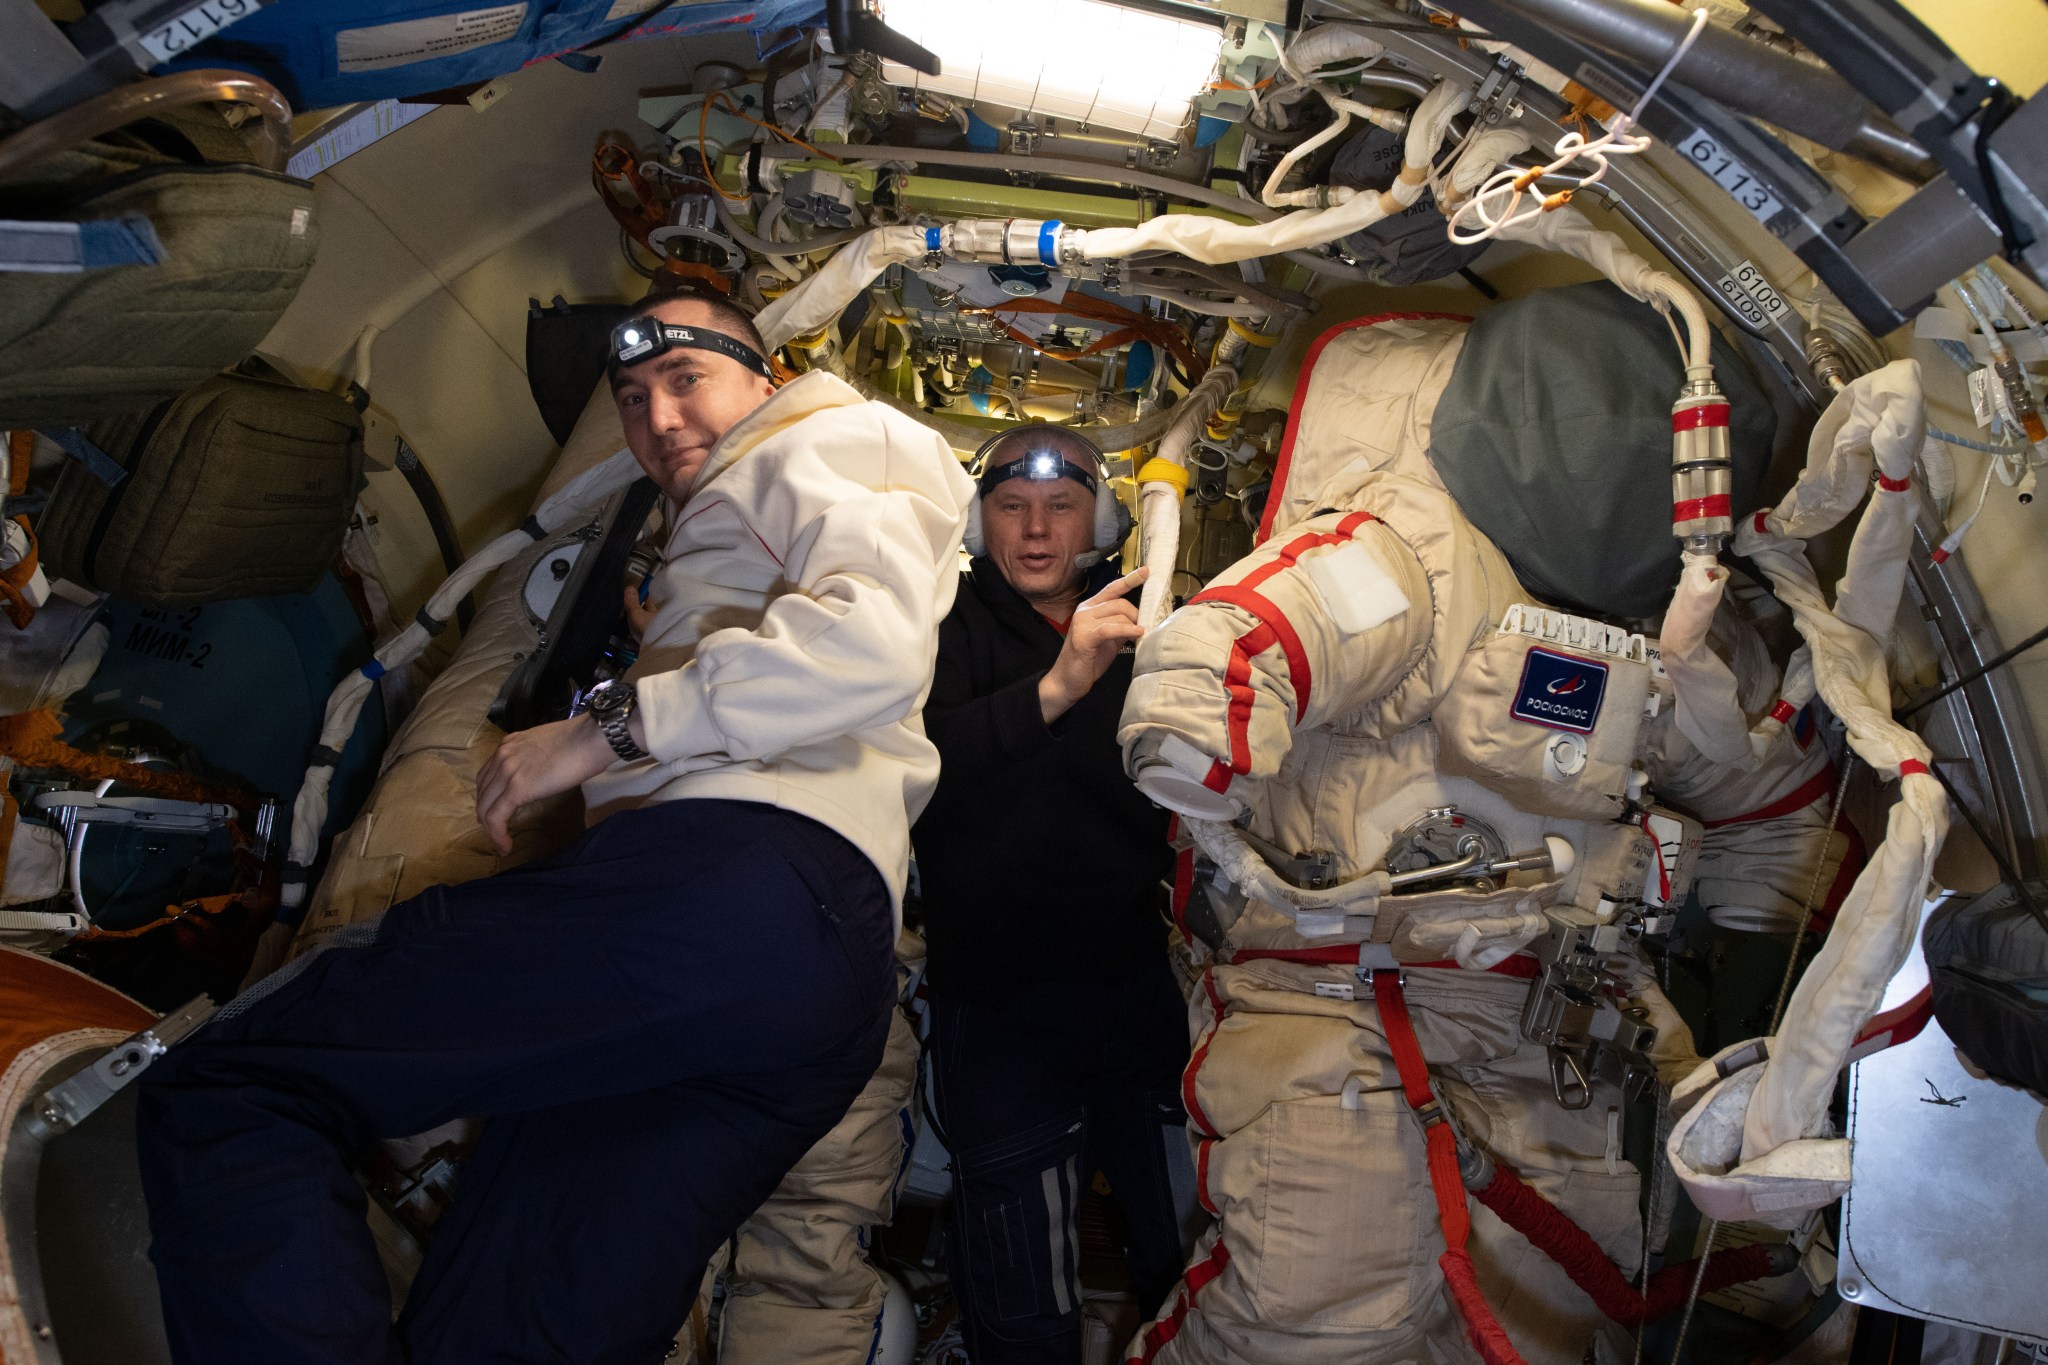 Roscosmos Flight Engineers Pyotr Dubrov, left, and Oleg Novitskiy prepare Russian Orlan spacesuits inside the International Space Station's Poisk mini-research module for an upcoming spacewalk.